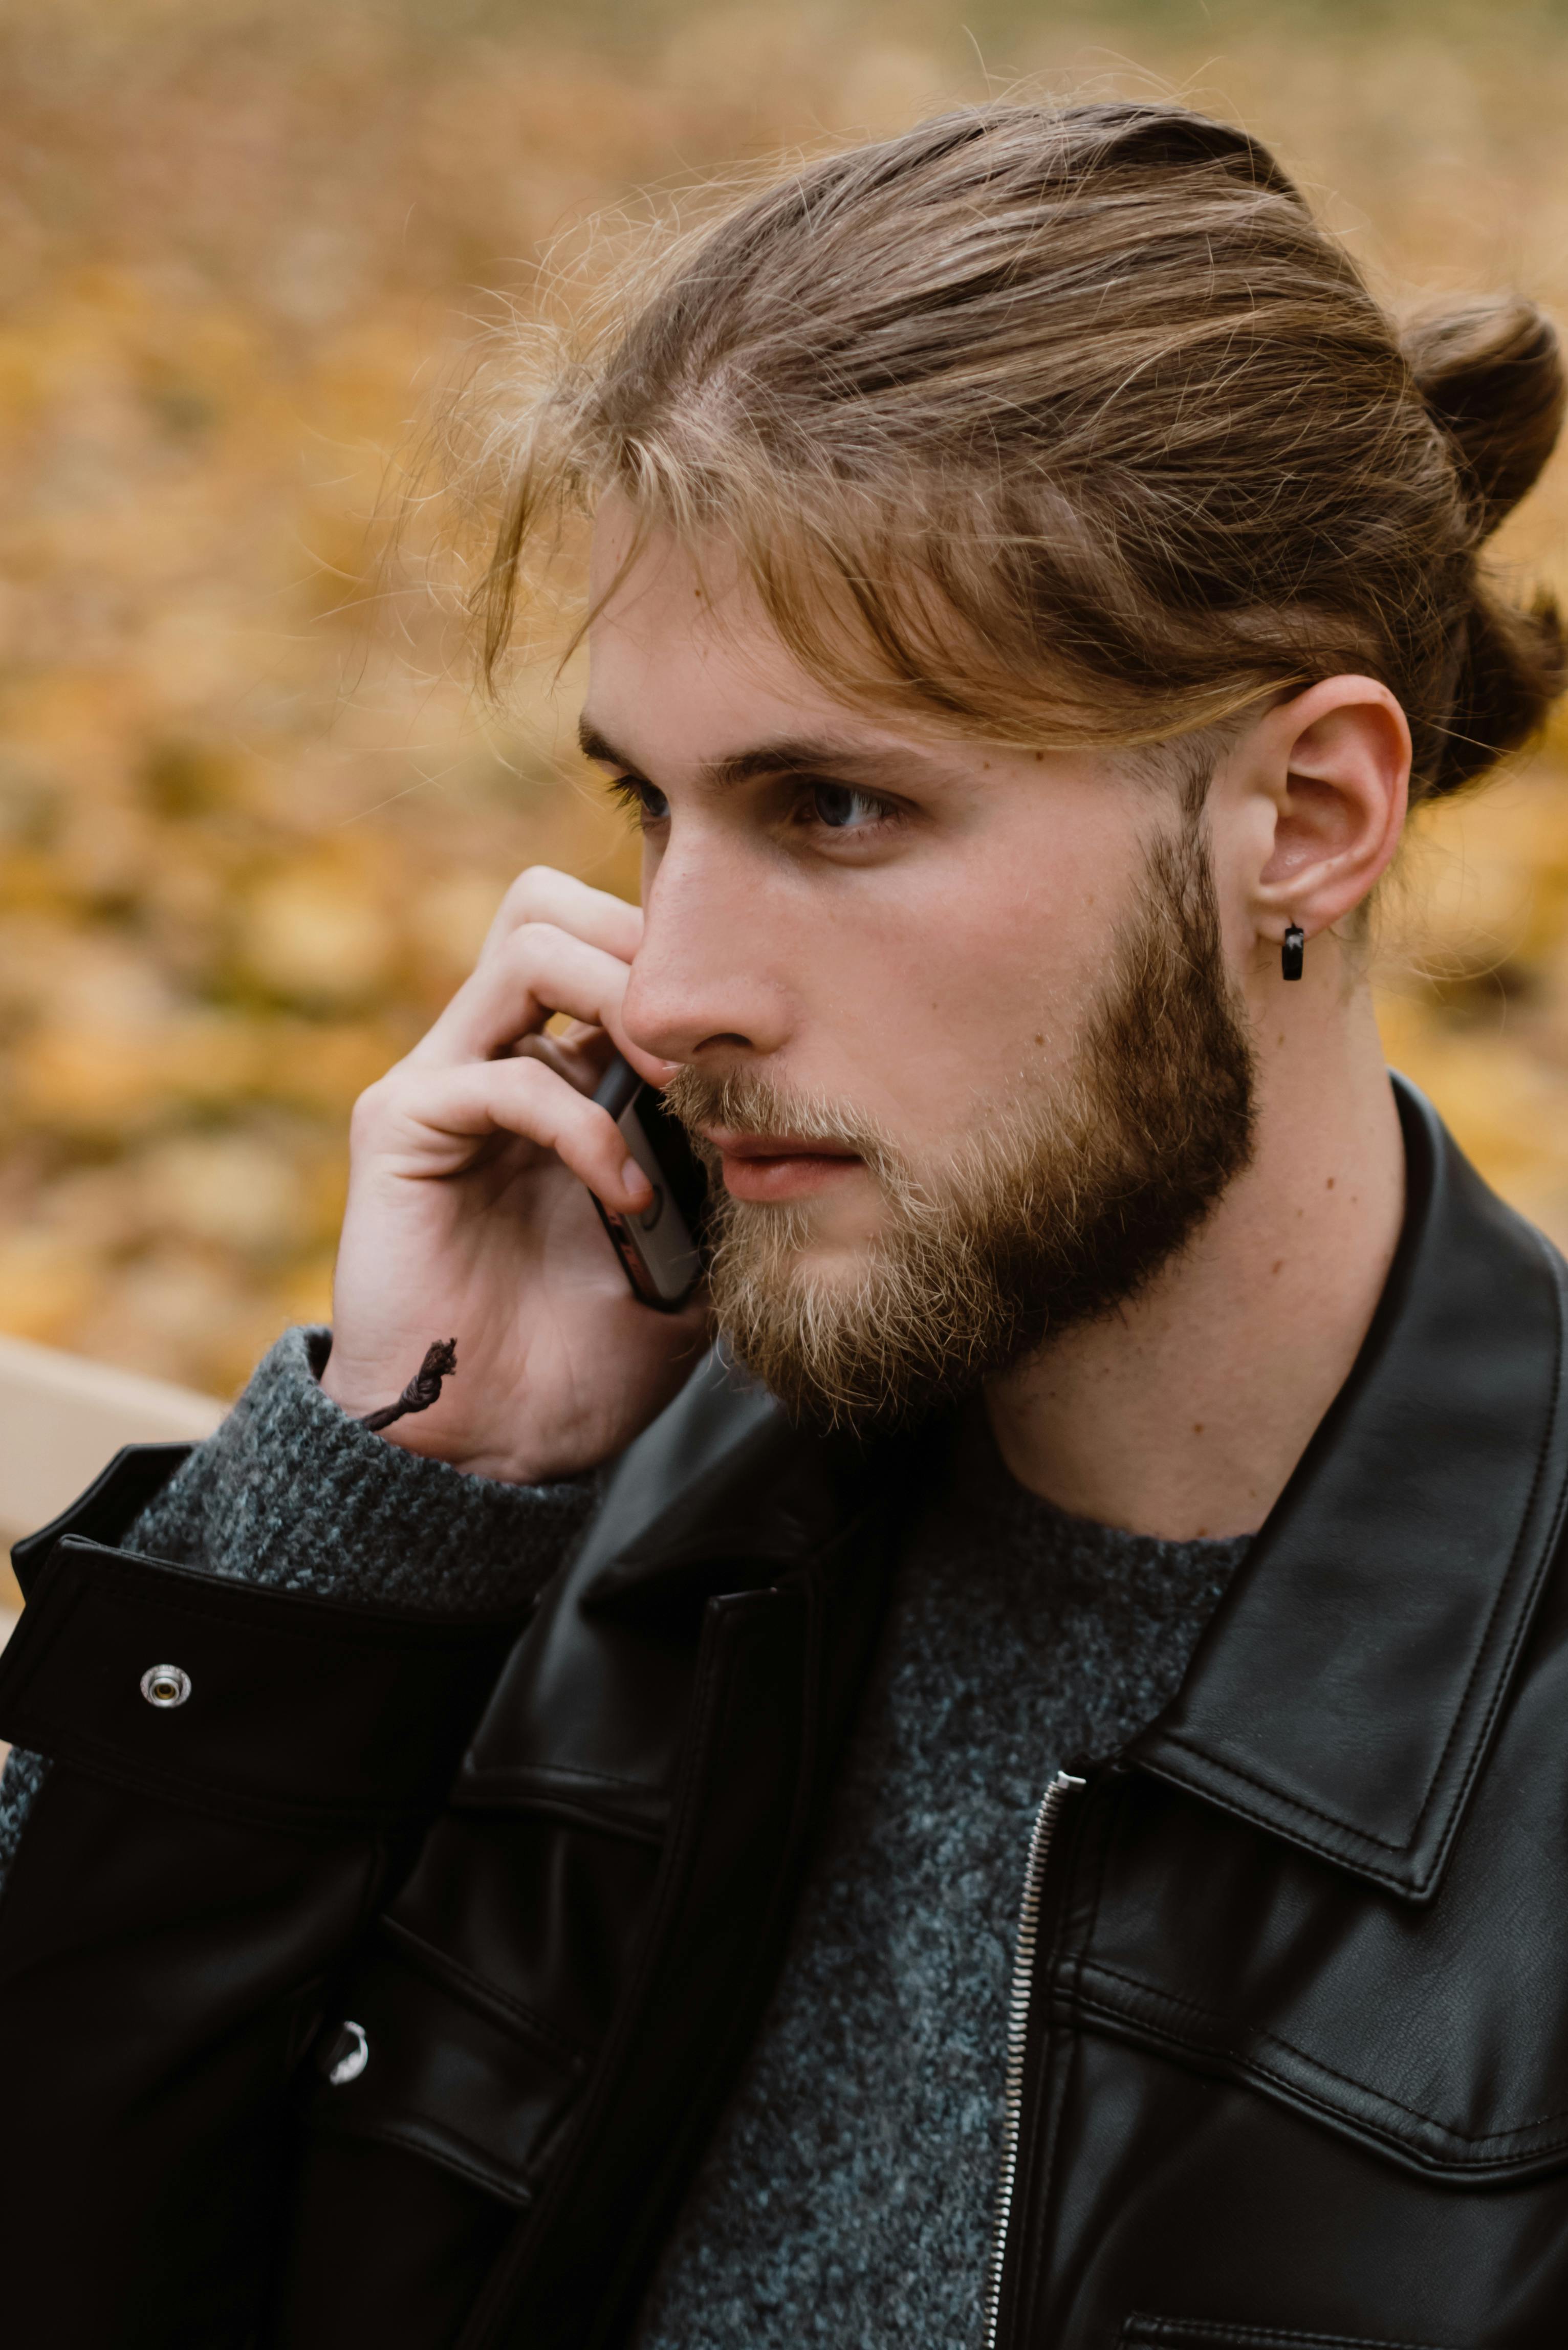 A concerned-looking man talking on the phone | Source: Pexels